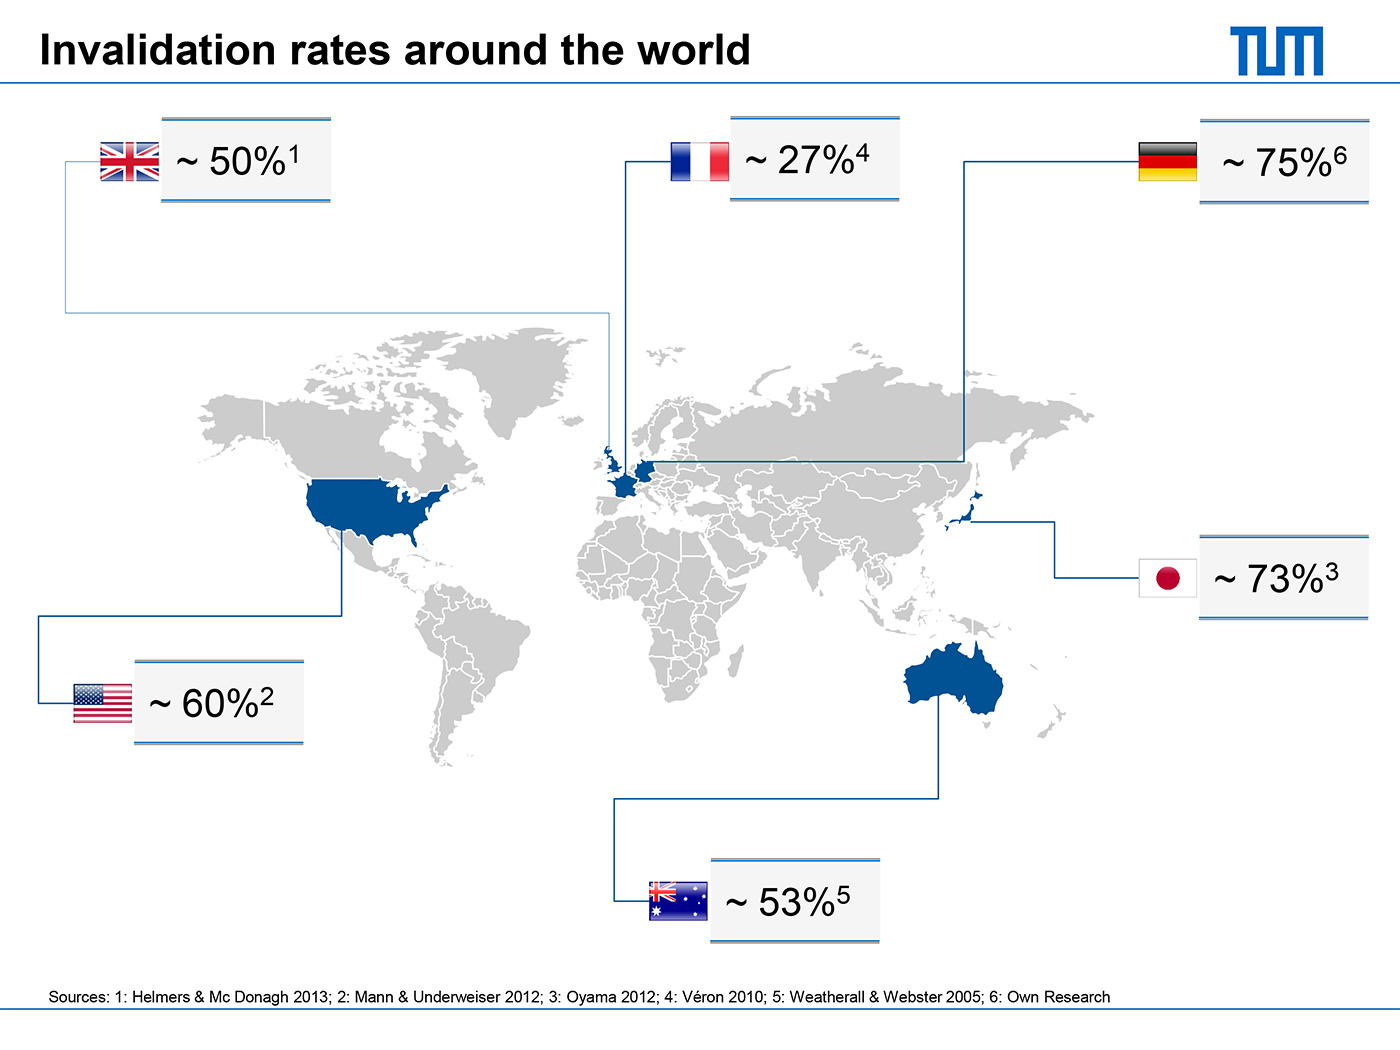 A map showing the invalidation rates of patents around the world